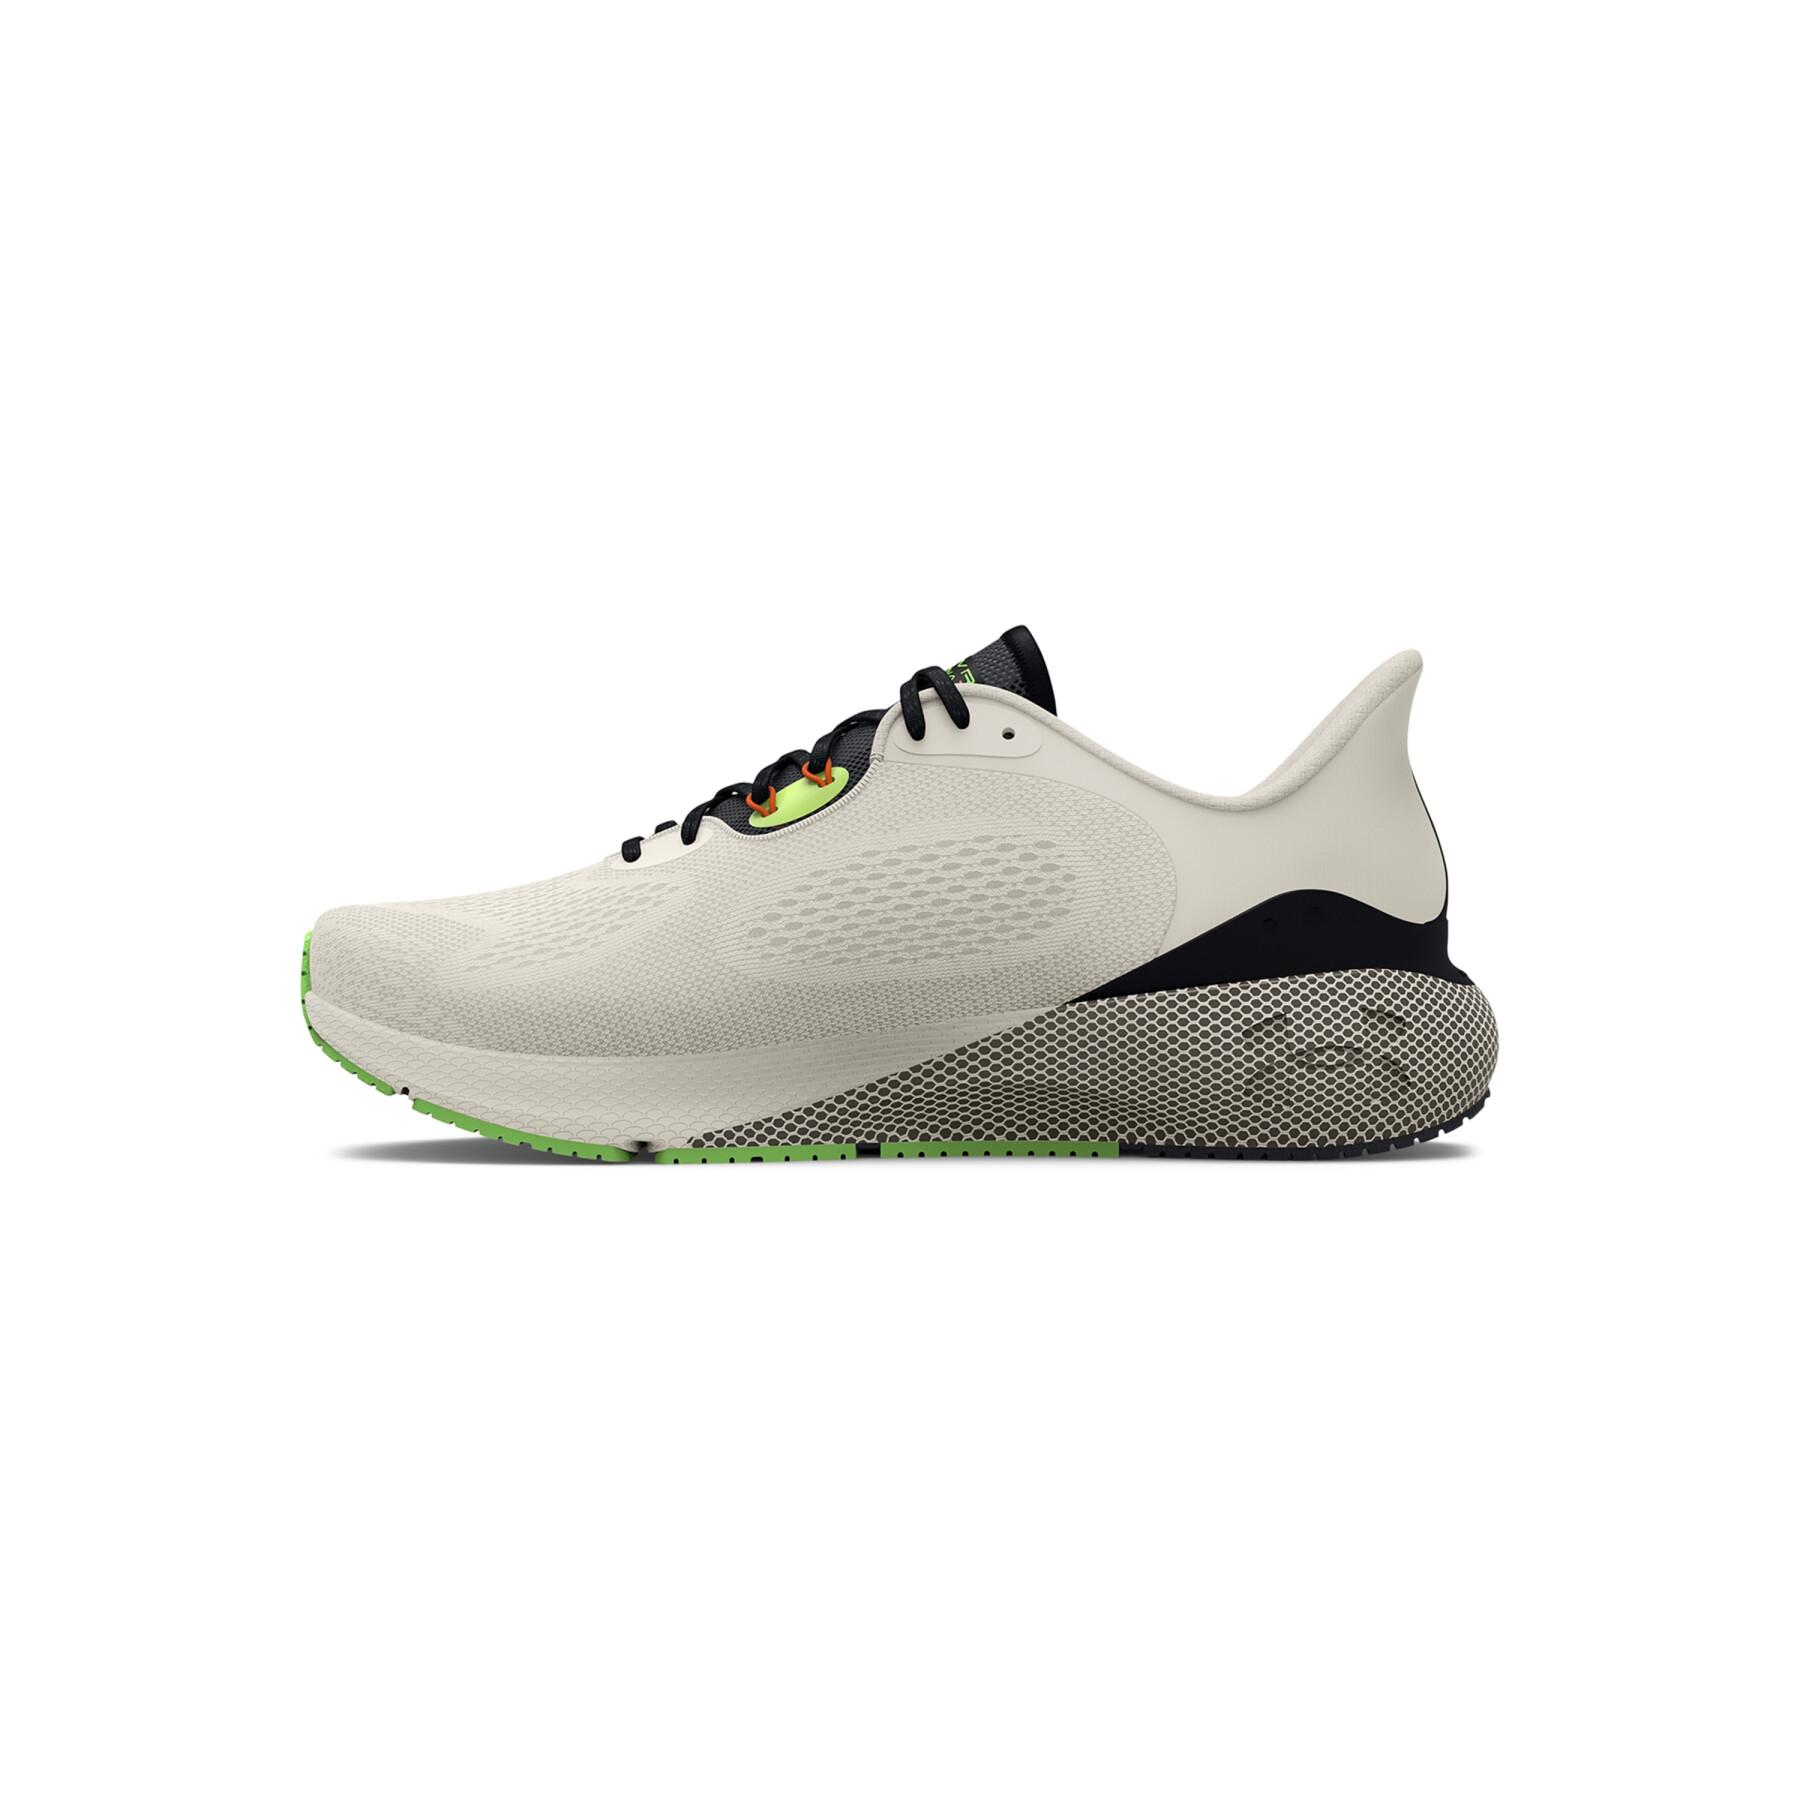 Running shoes Under Armour Hovr Machina 3